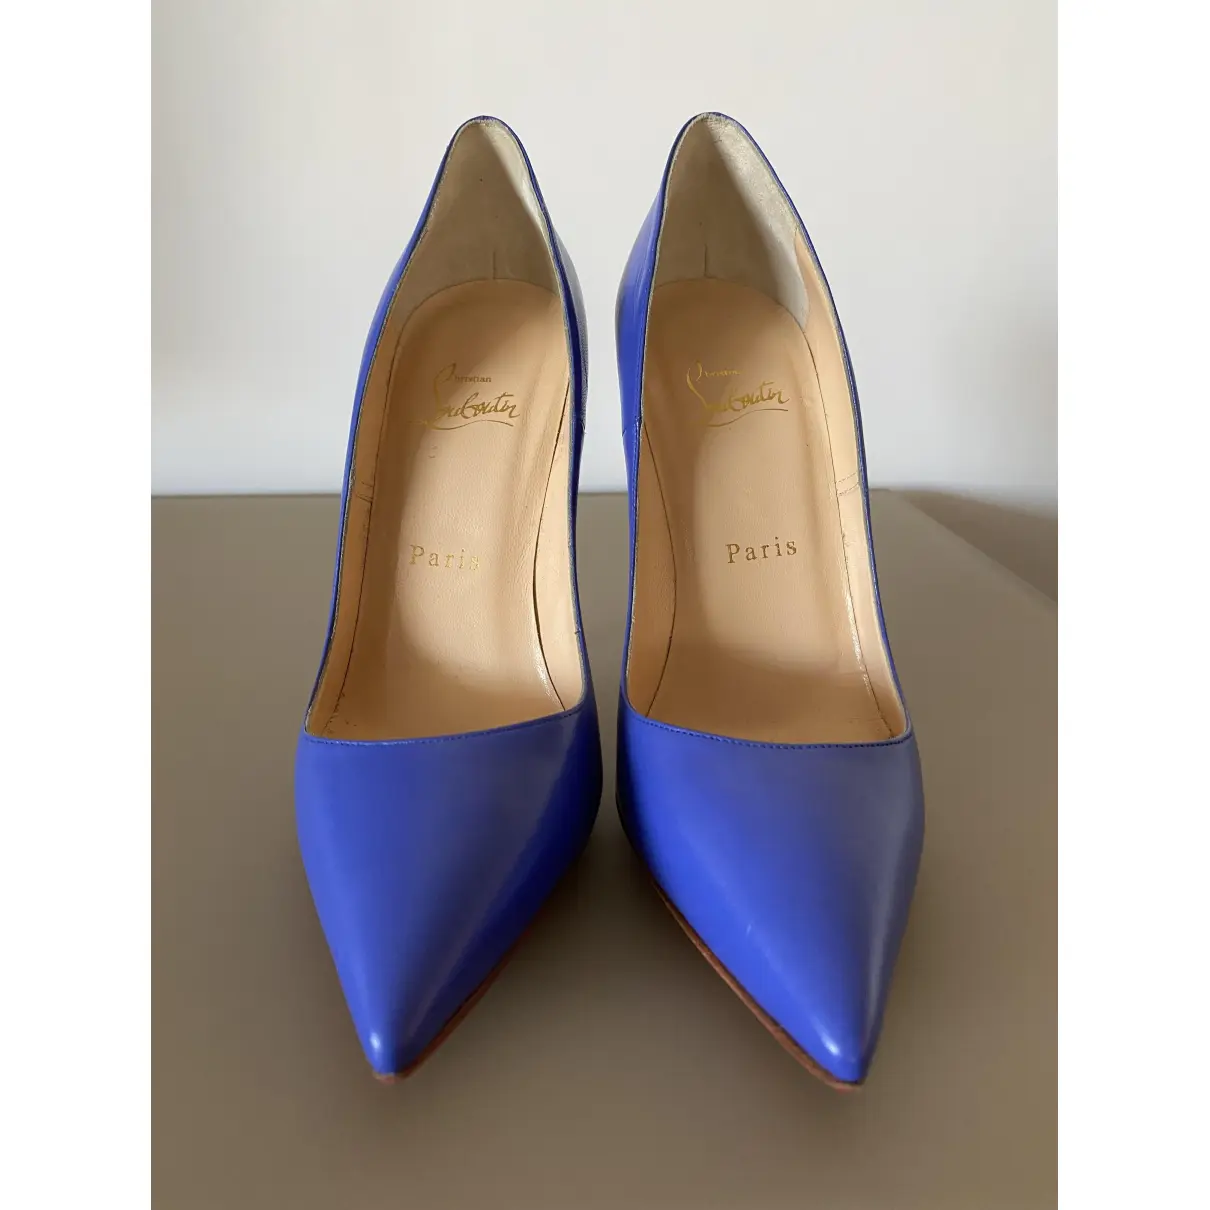 Buy Christian Louboutin Pigalle leather heels online